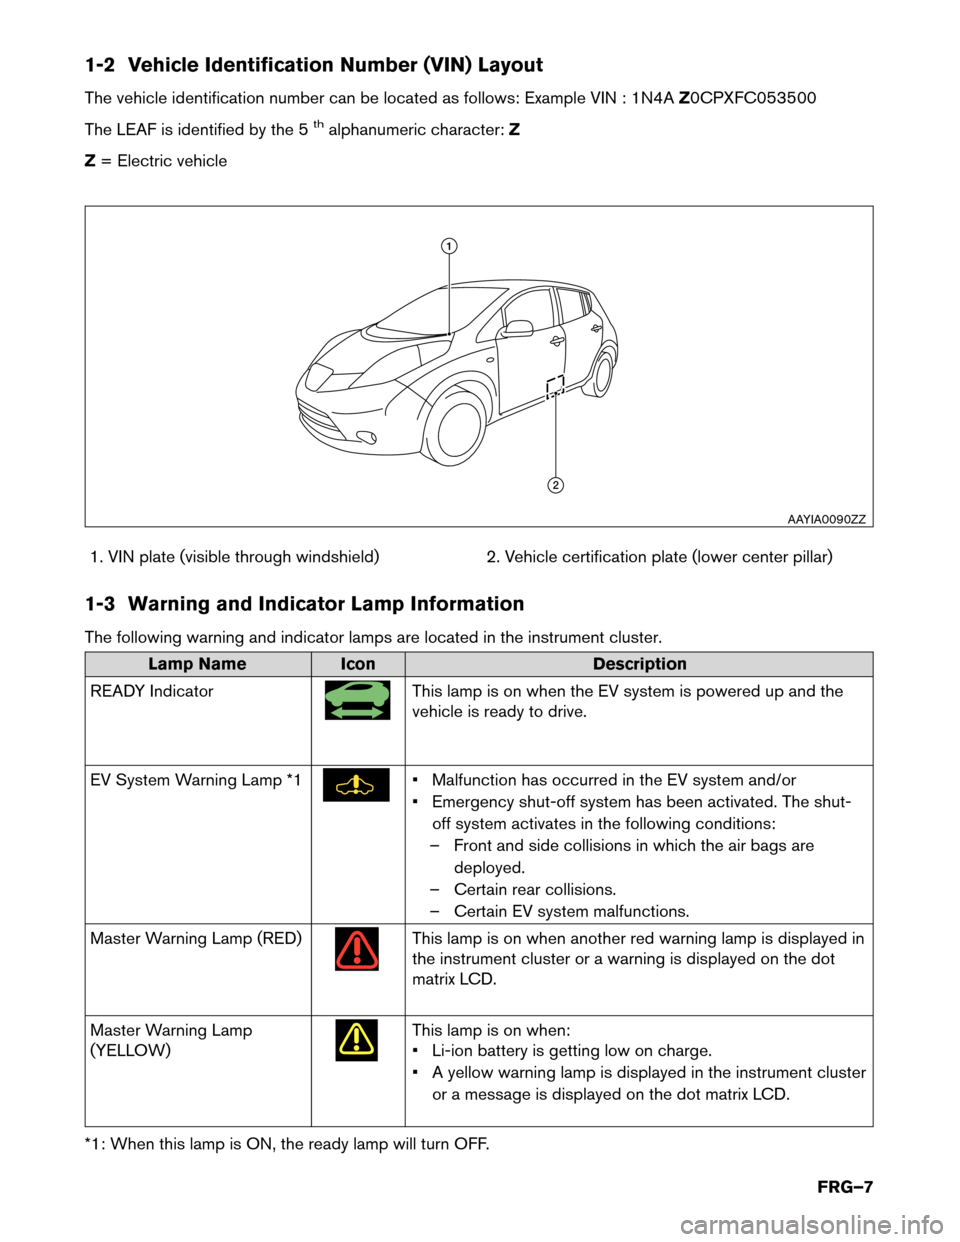 NISSAN LEAF 2015 1.G First Responders Guide 1-2 Vehicle Identification Number (VIN) Layout
The
vehicle identification number can be located as follows: Example VIN : 1N4A Z0CPXFC053500
The LEAF is identified by the 5
thalphanumeric character: Z